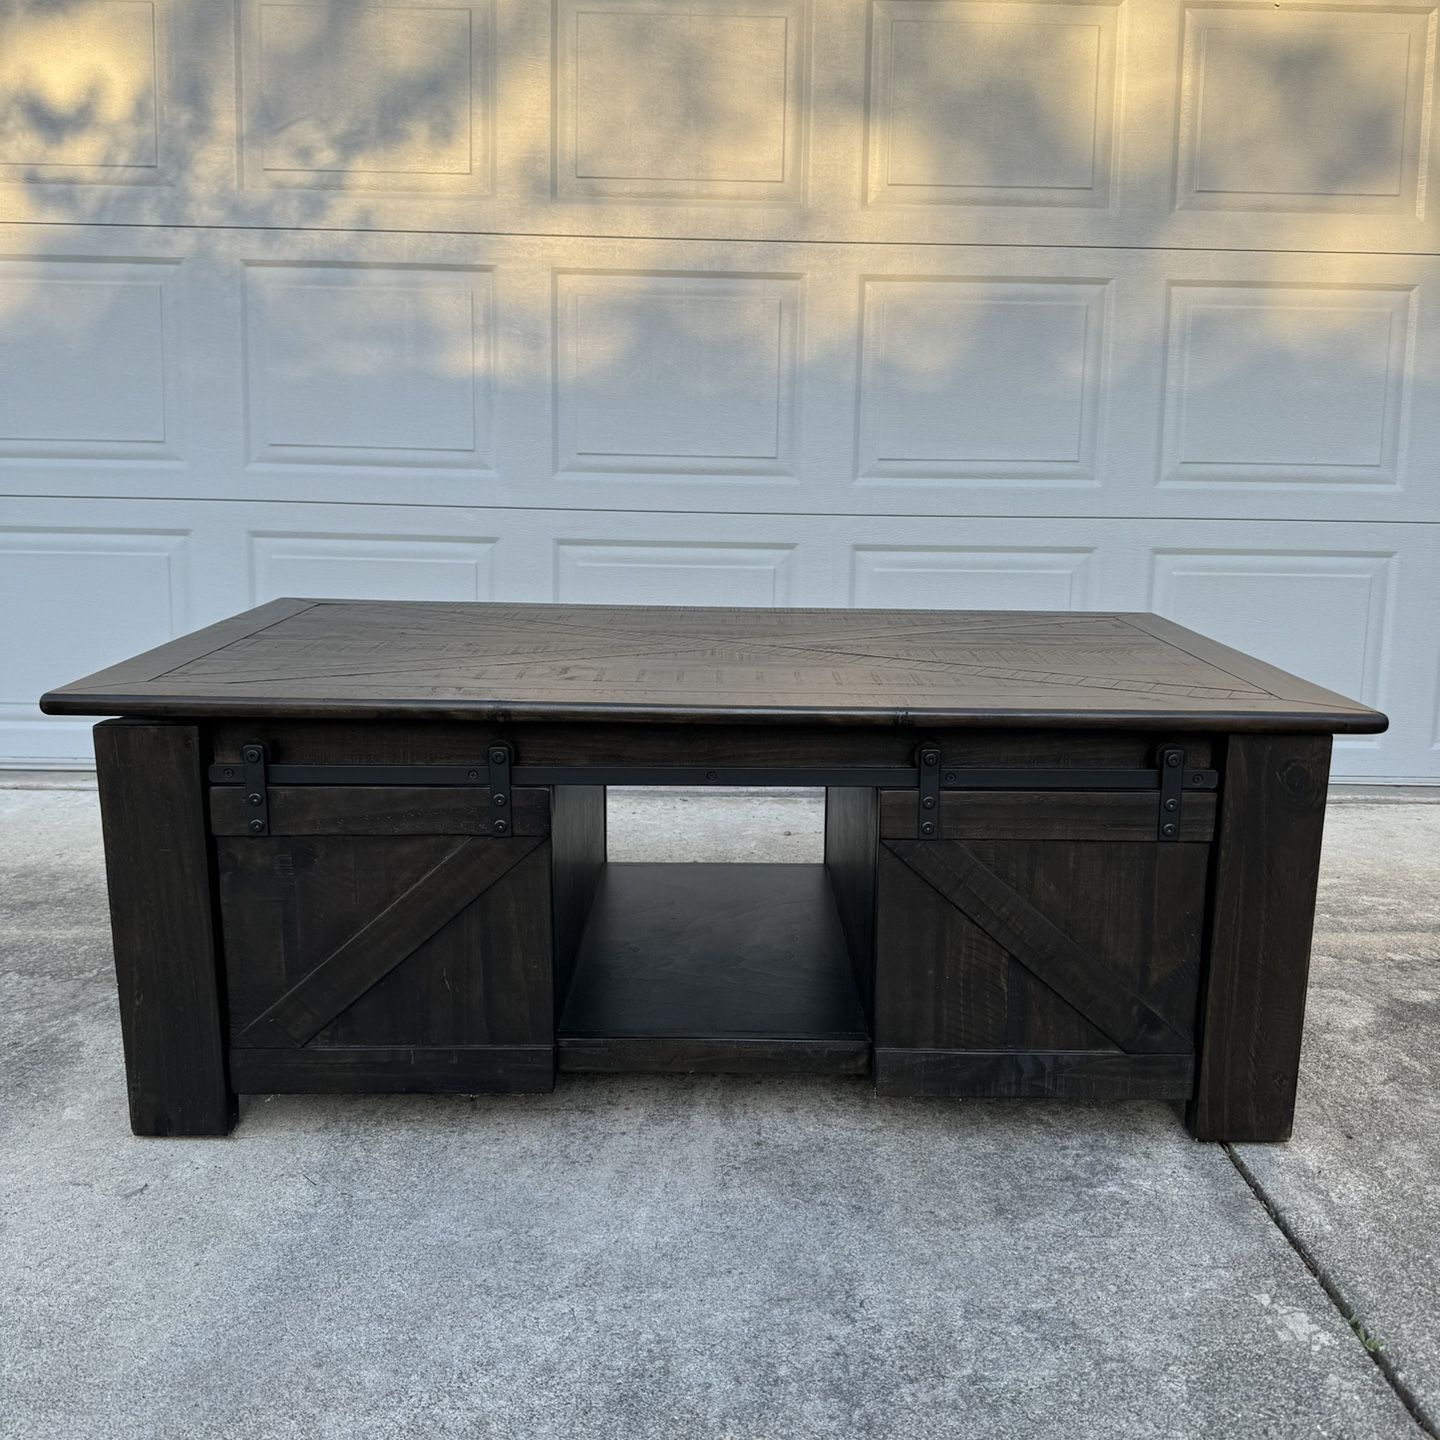 Coffee Table - Adjustable Height, Hidden Compartments